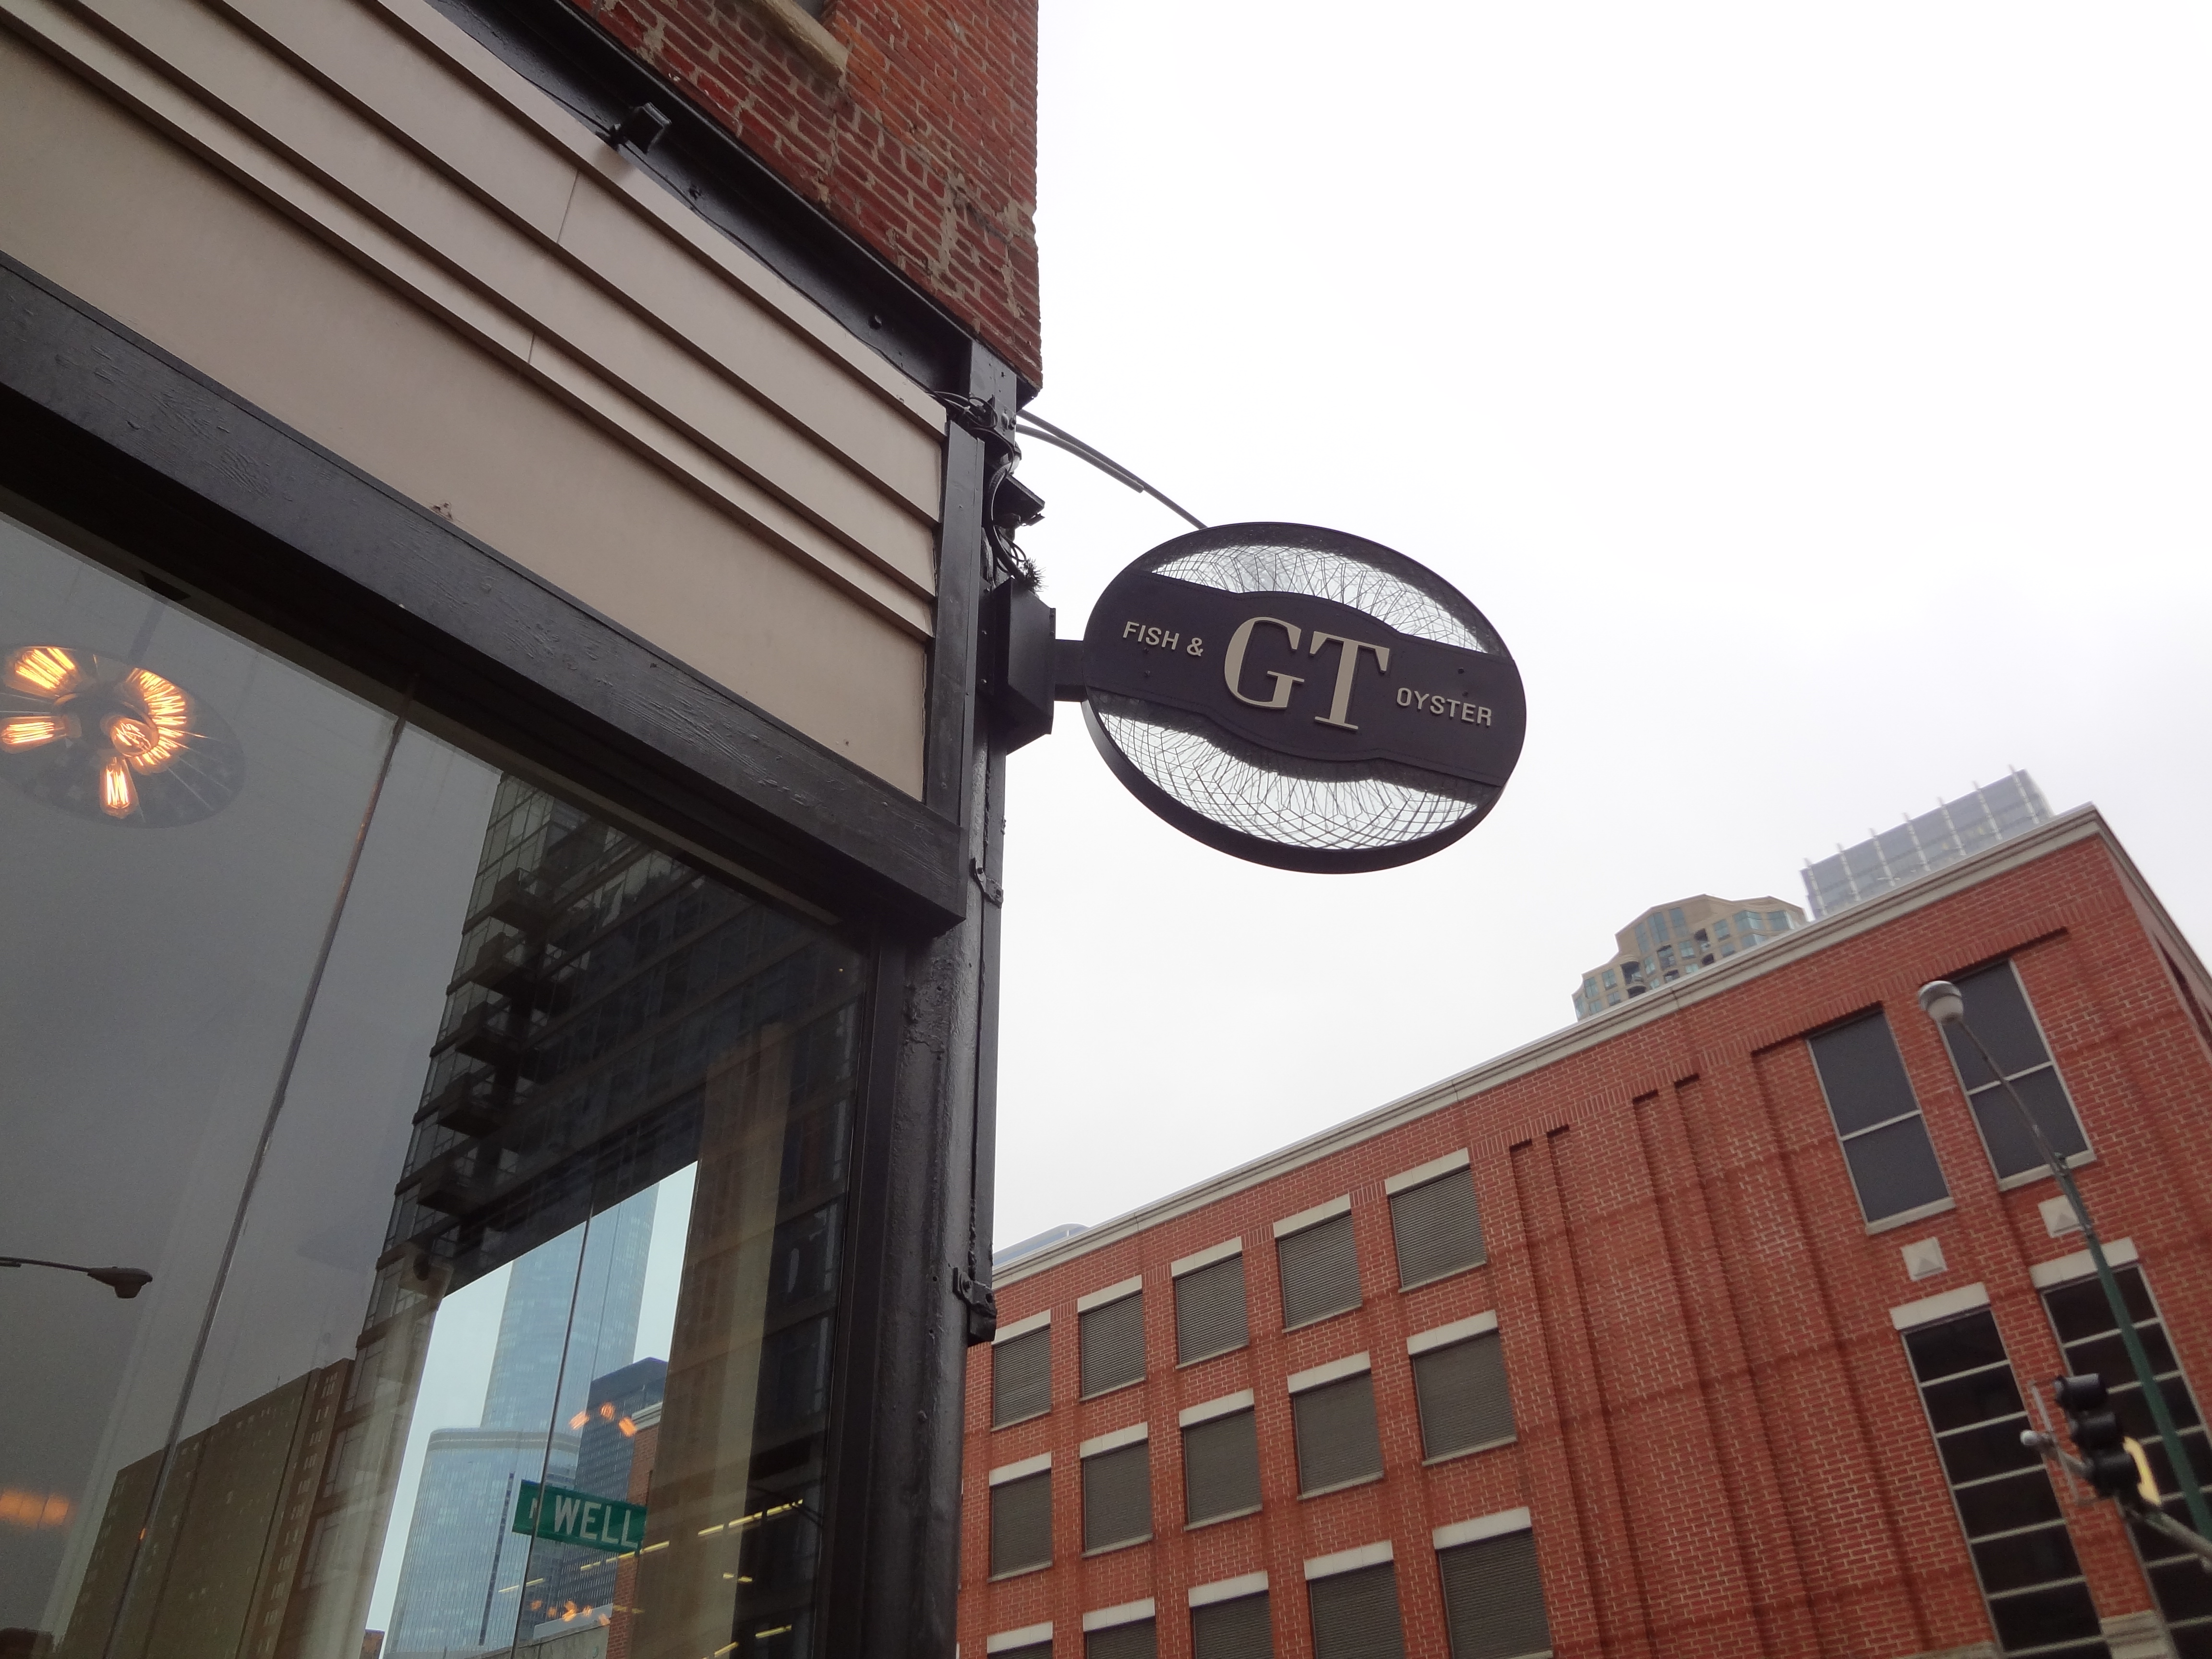 GT Fish & Oyster Sign